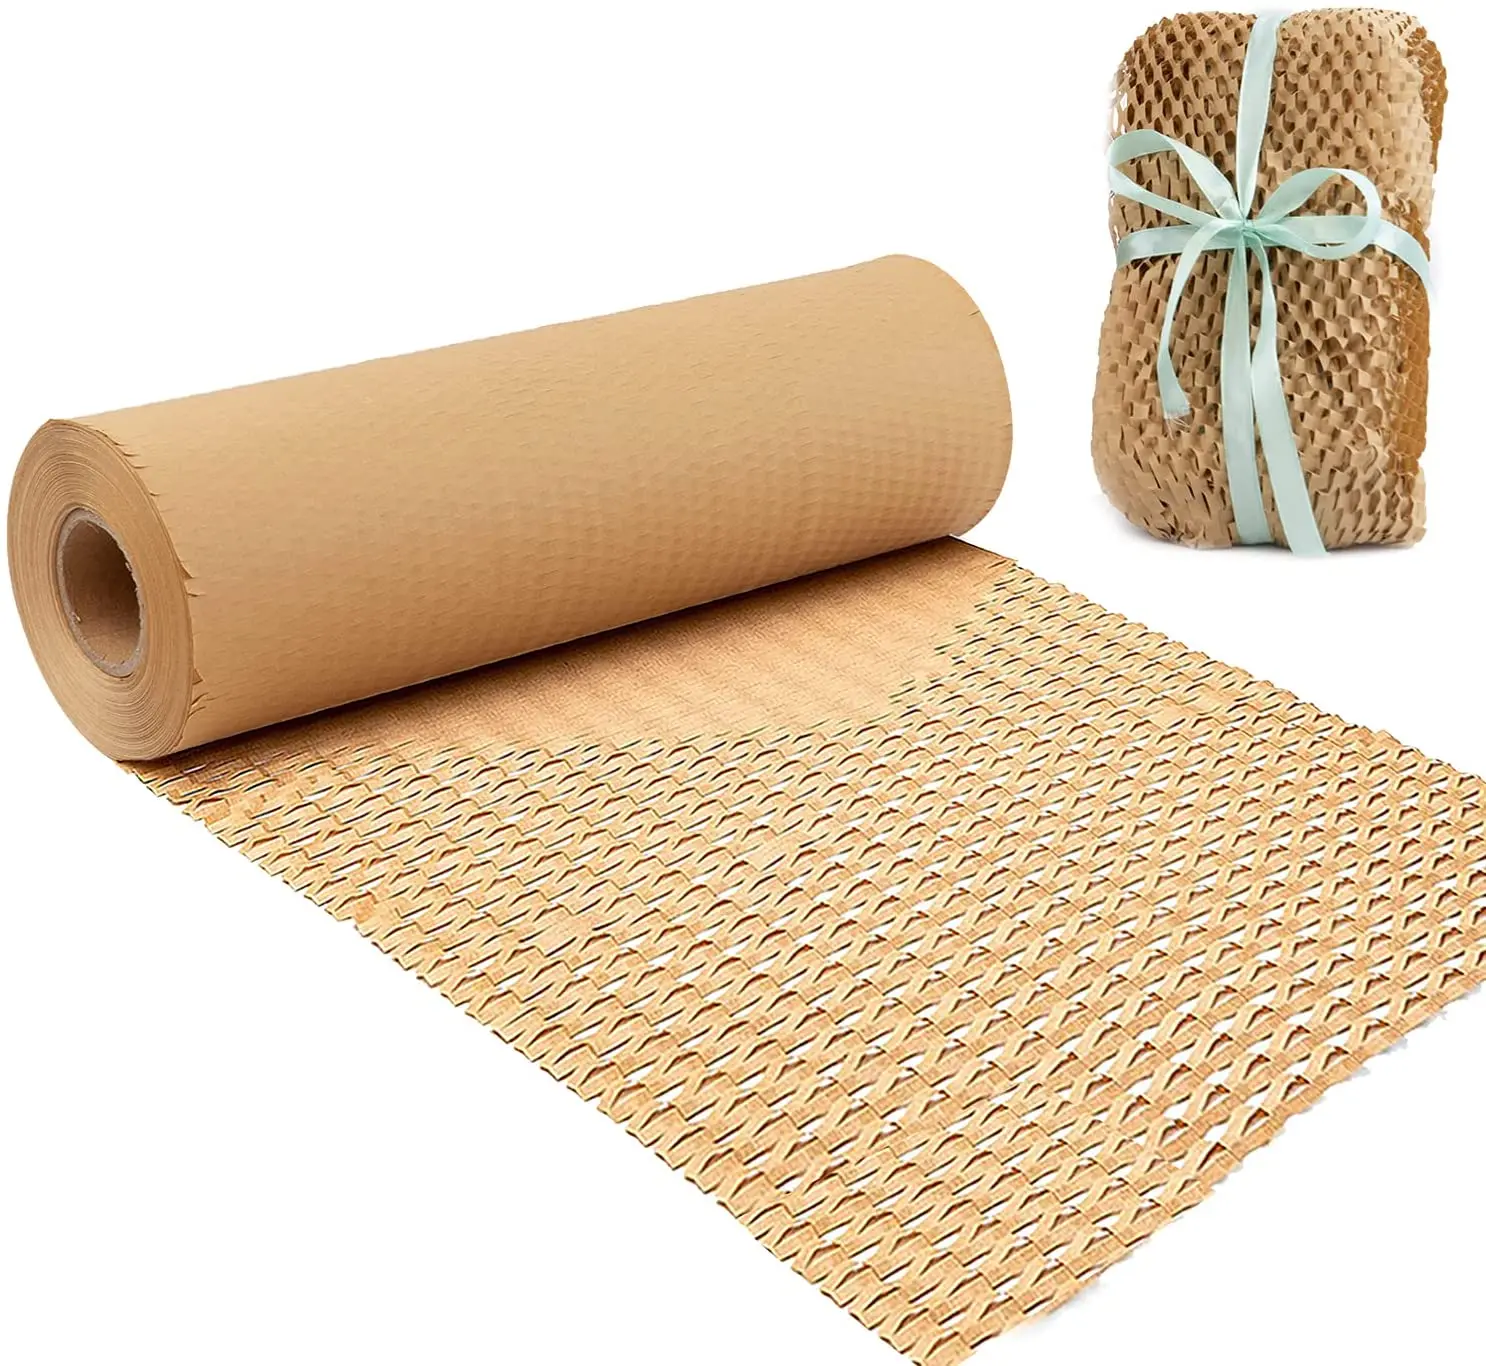 Recyclable Honeycomb Packing Paper - The Perfect Moving & Shipping Wrap for  Gifts & Packages!